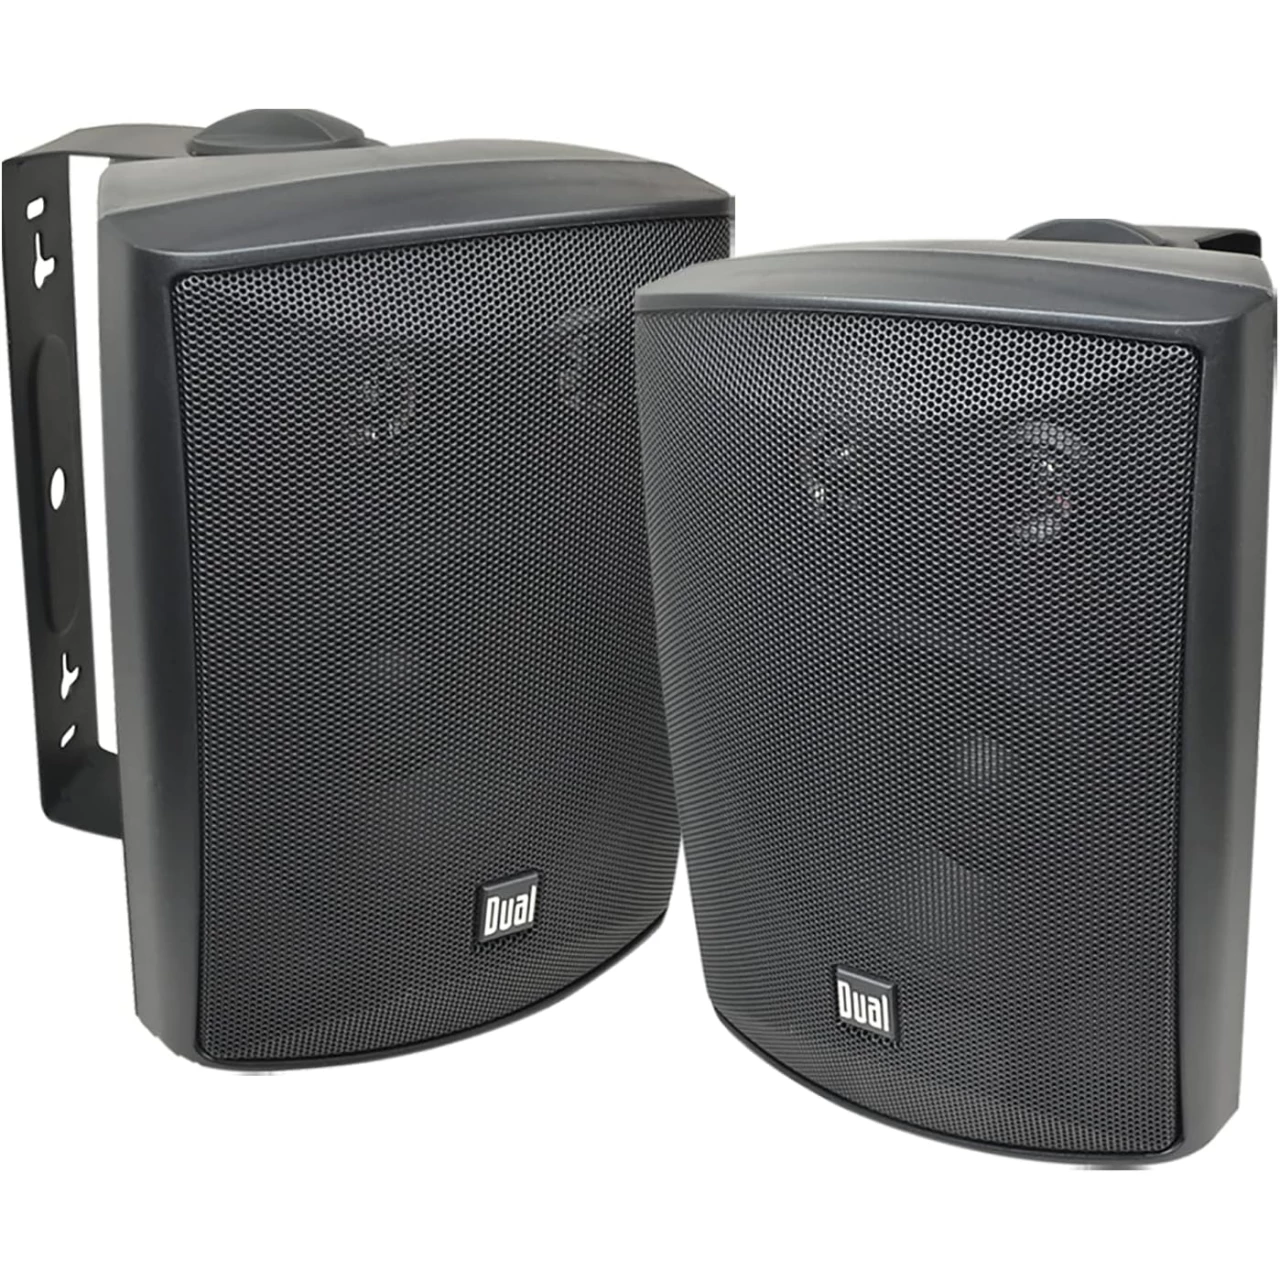 Dual Electronics LU53PB 5.25&quot; 3-Way High Performance Outdoor Indoor Speakers with Powerful Bass | Effortless Mounting Swivel Brackets | All Weather Resistance | Expansive Stereo Sound Coverage | Sold in Pairs, Black